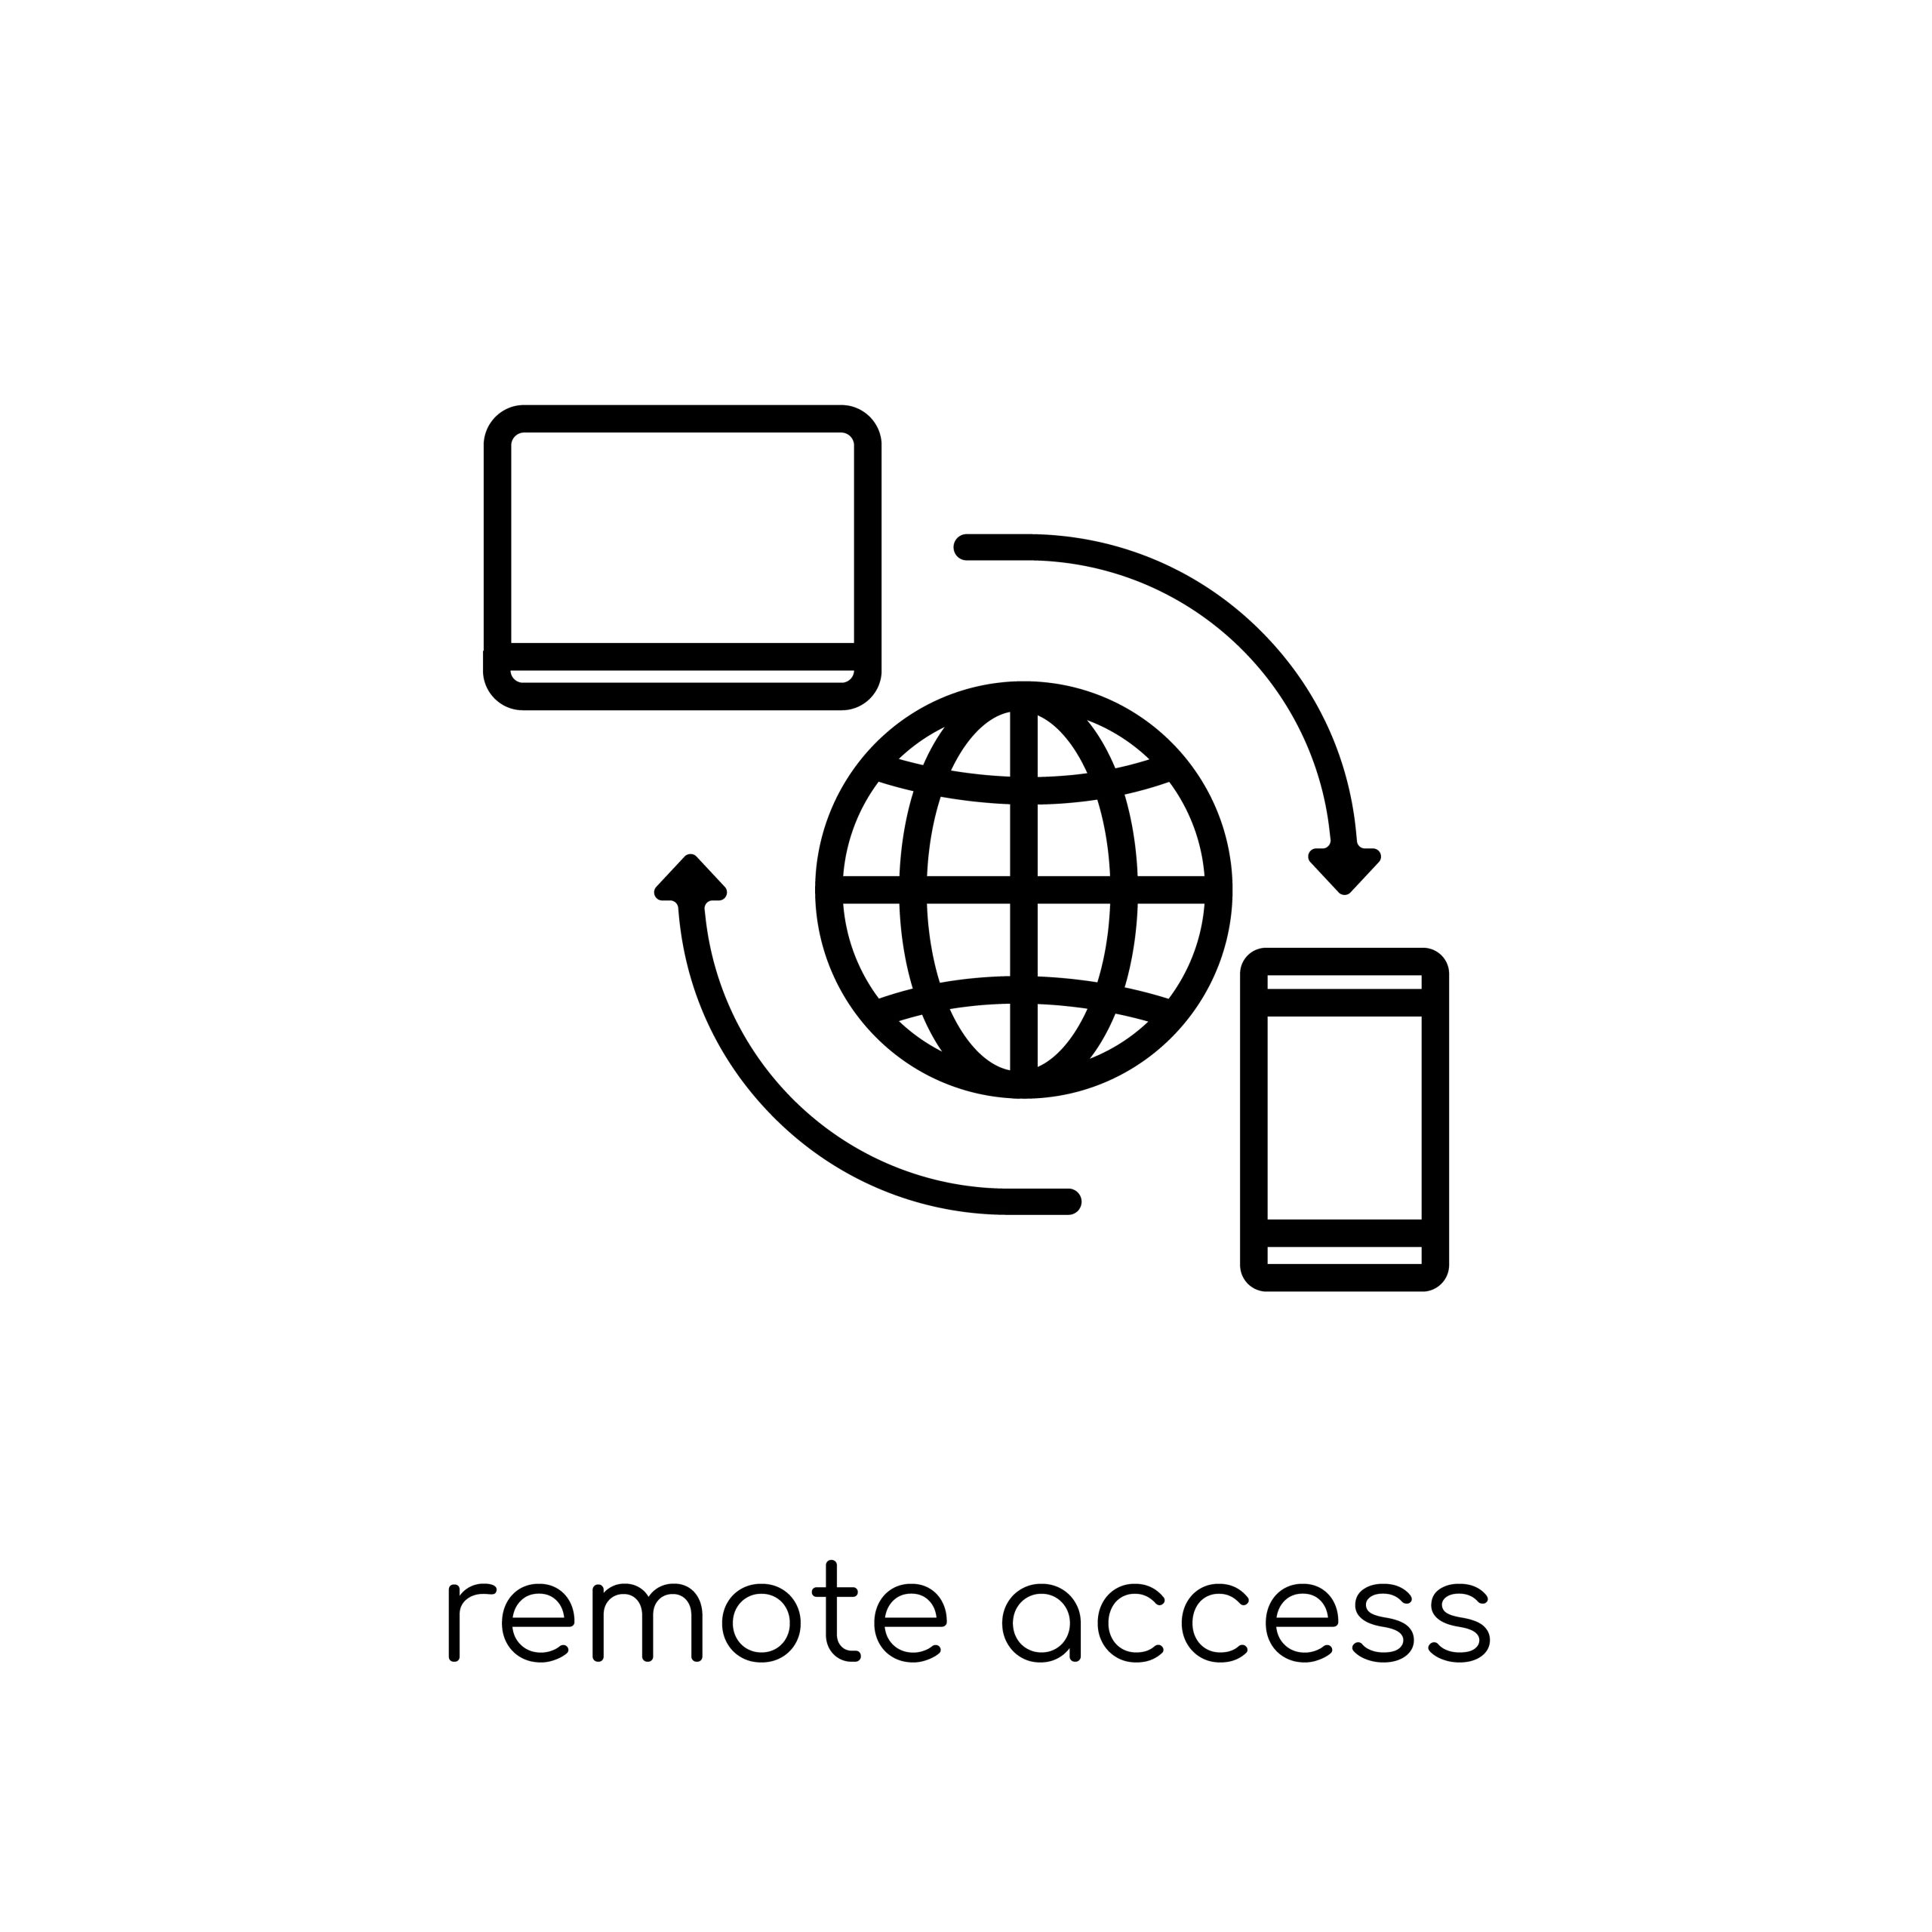 Why Your Business Needs Remote Access and Monitoring